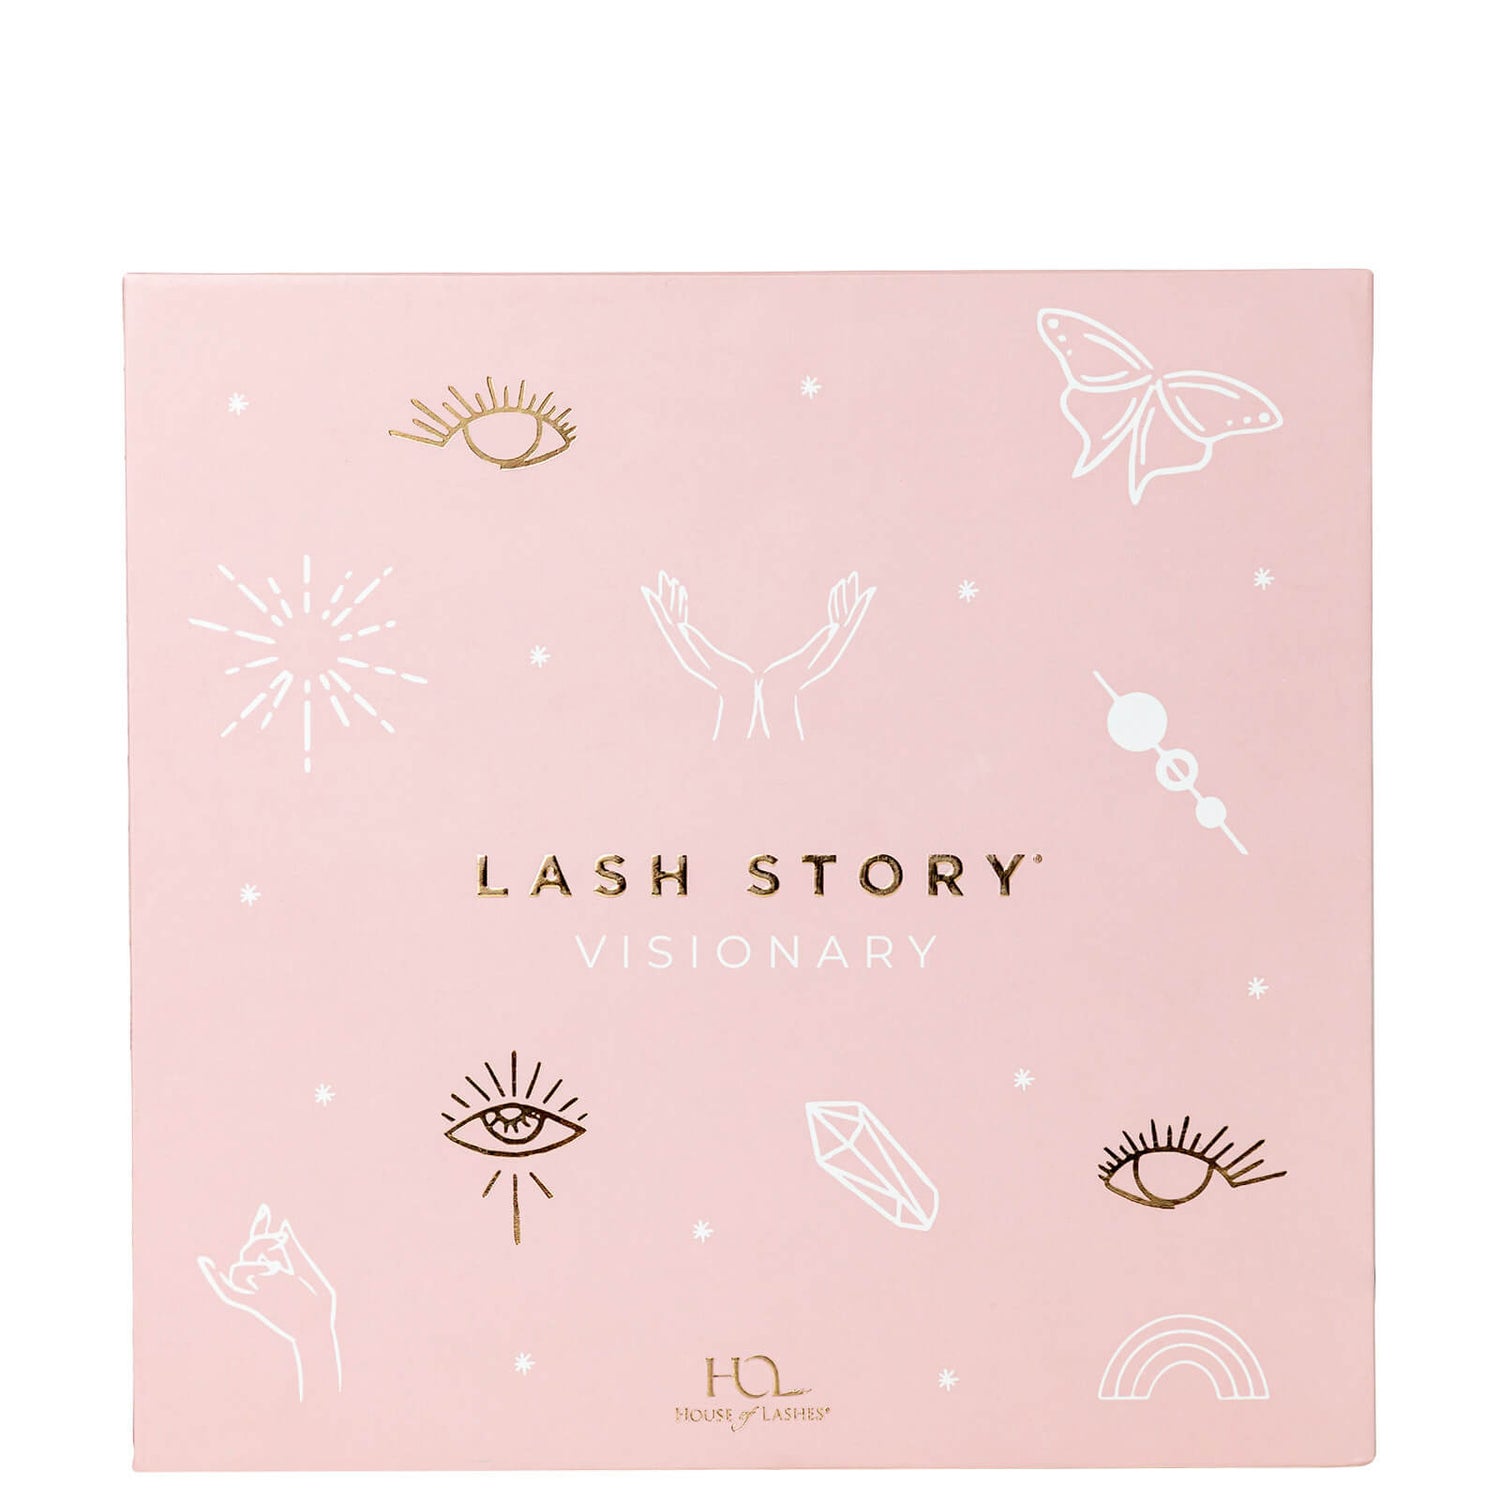 House of Lashes Lash Story Visionary